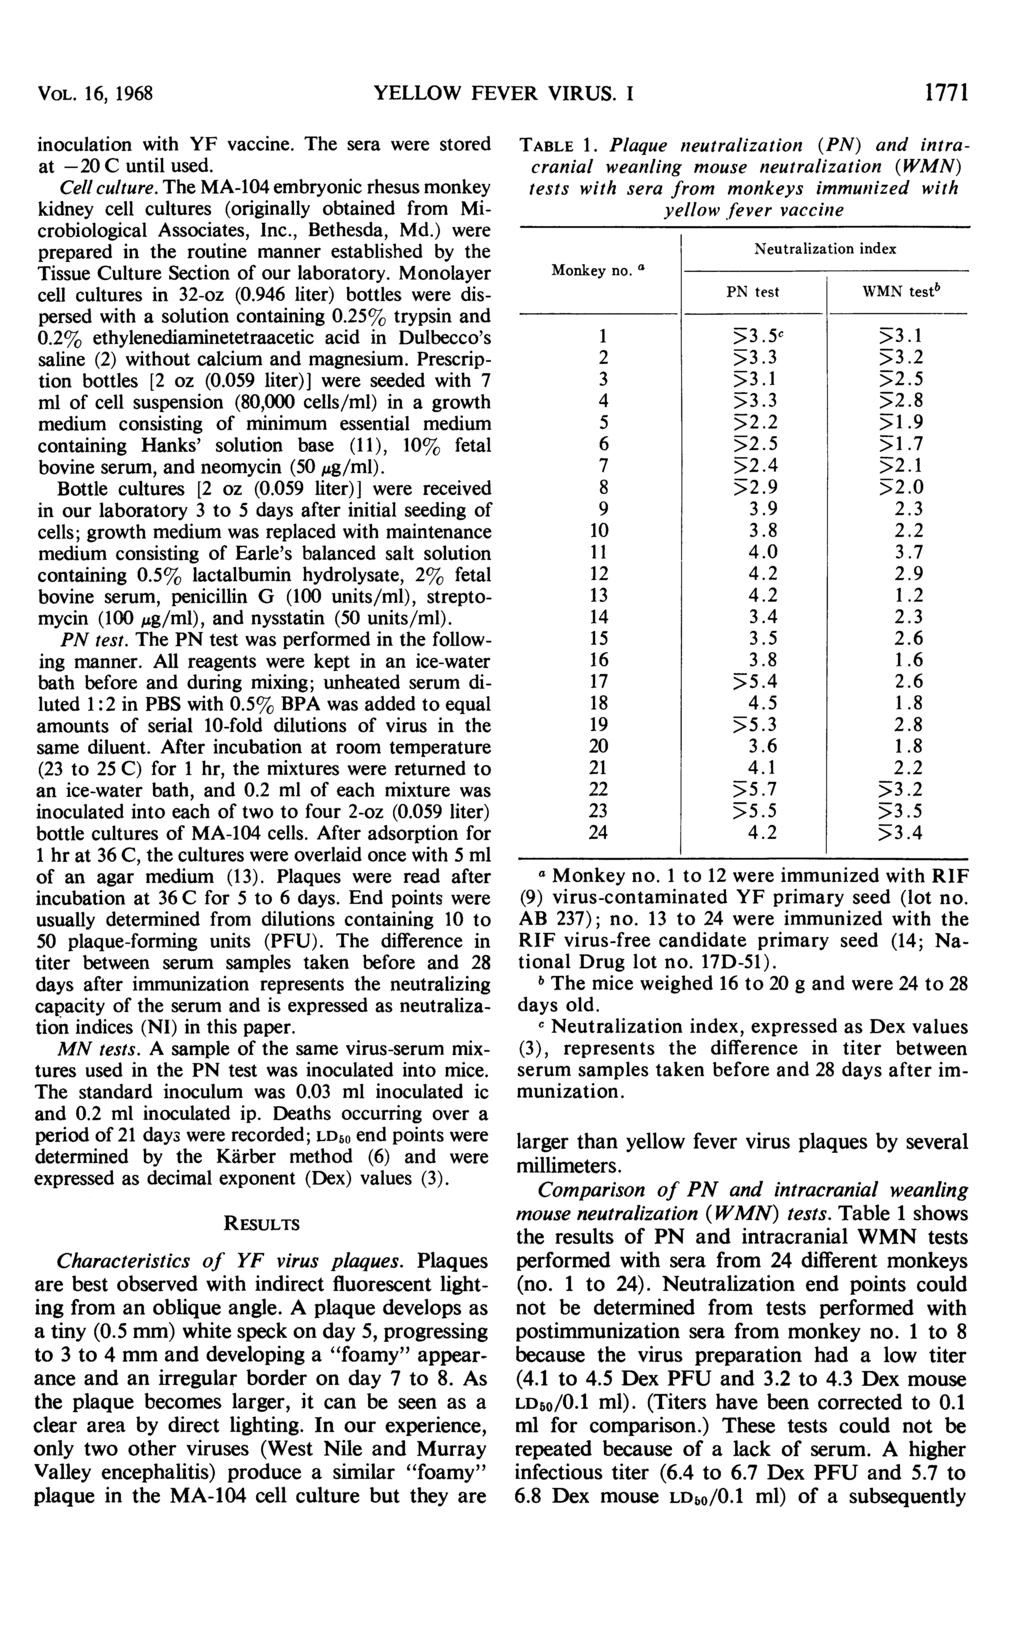 VOL. 16, 1968 YELLOW FEVER VIRUS. I 1771 inoculation with YF vaccine. The sera were stored at -20 C until used. Cell culture.